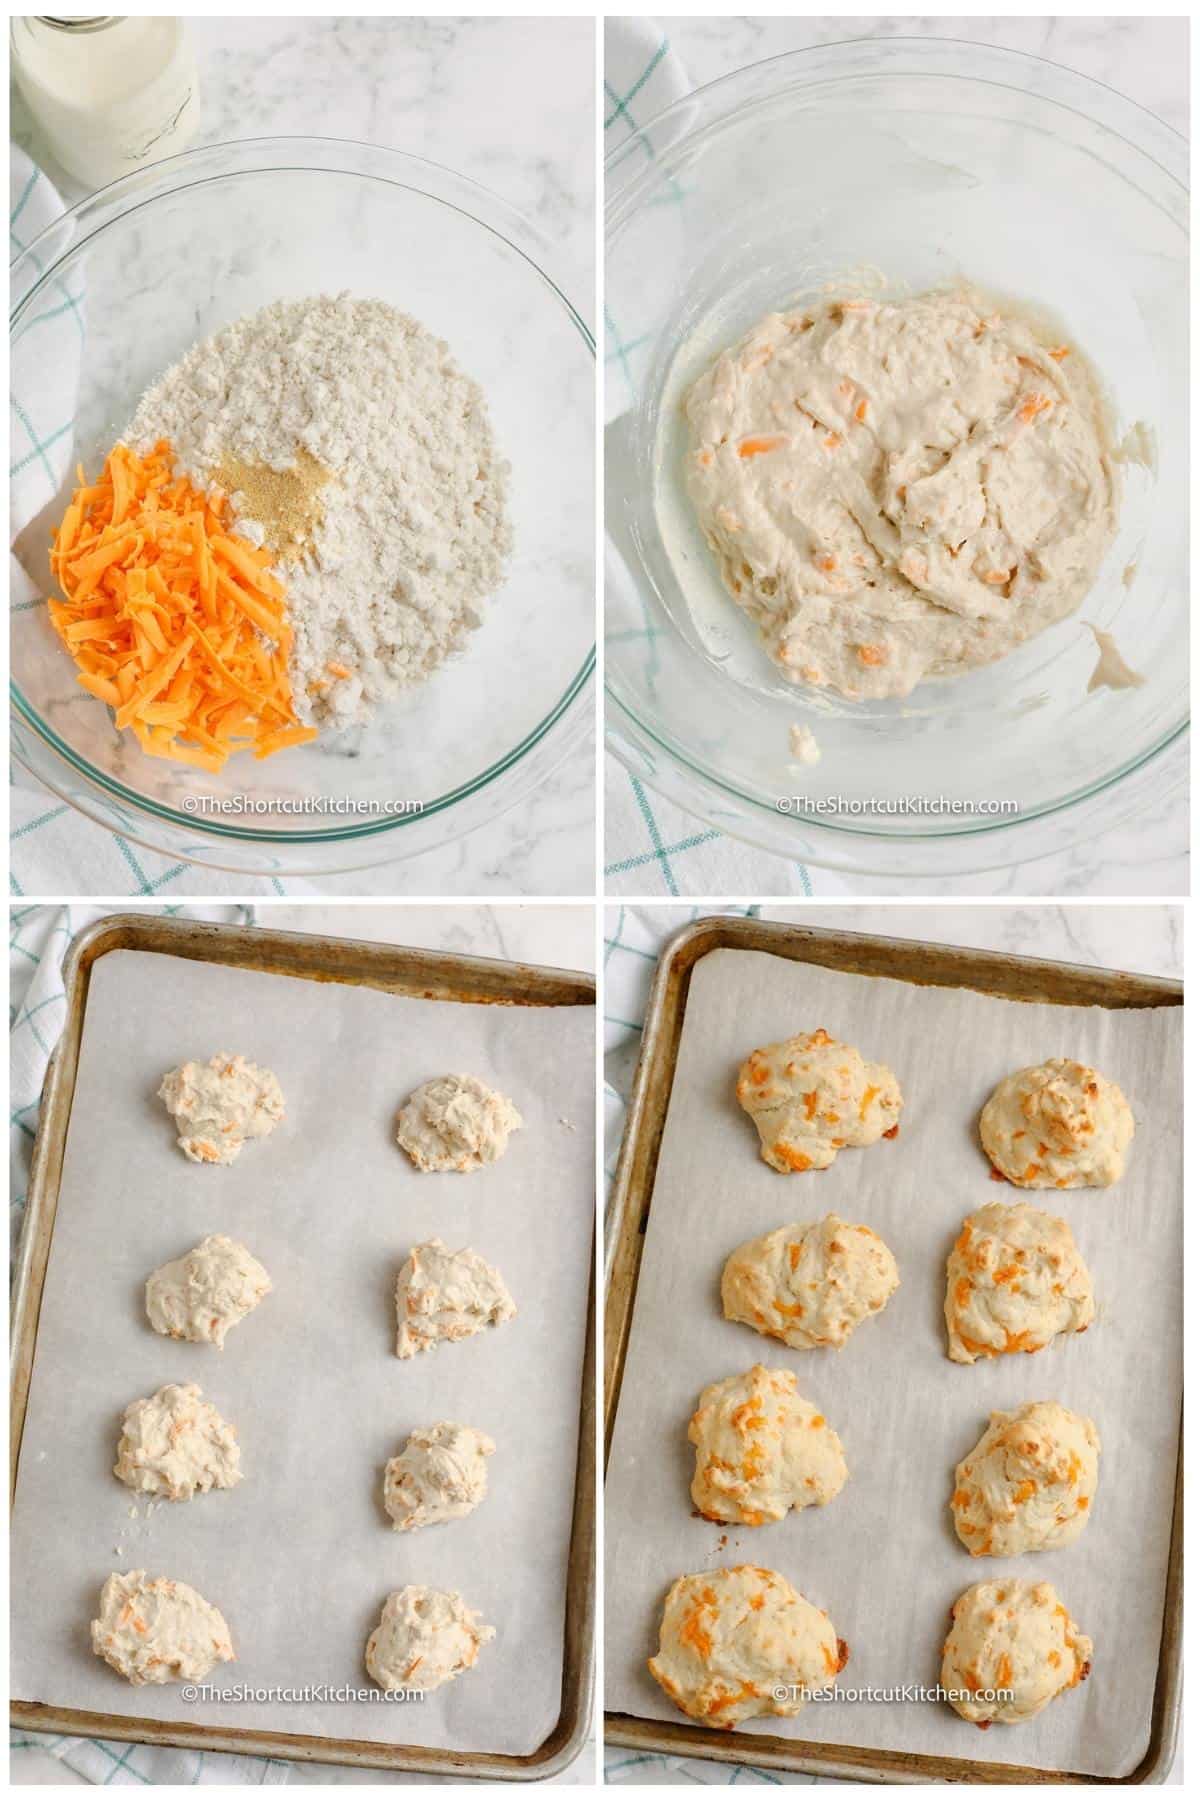 process of mixing ingredients together to make Easy Drop Biscuit Recipe